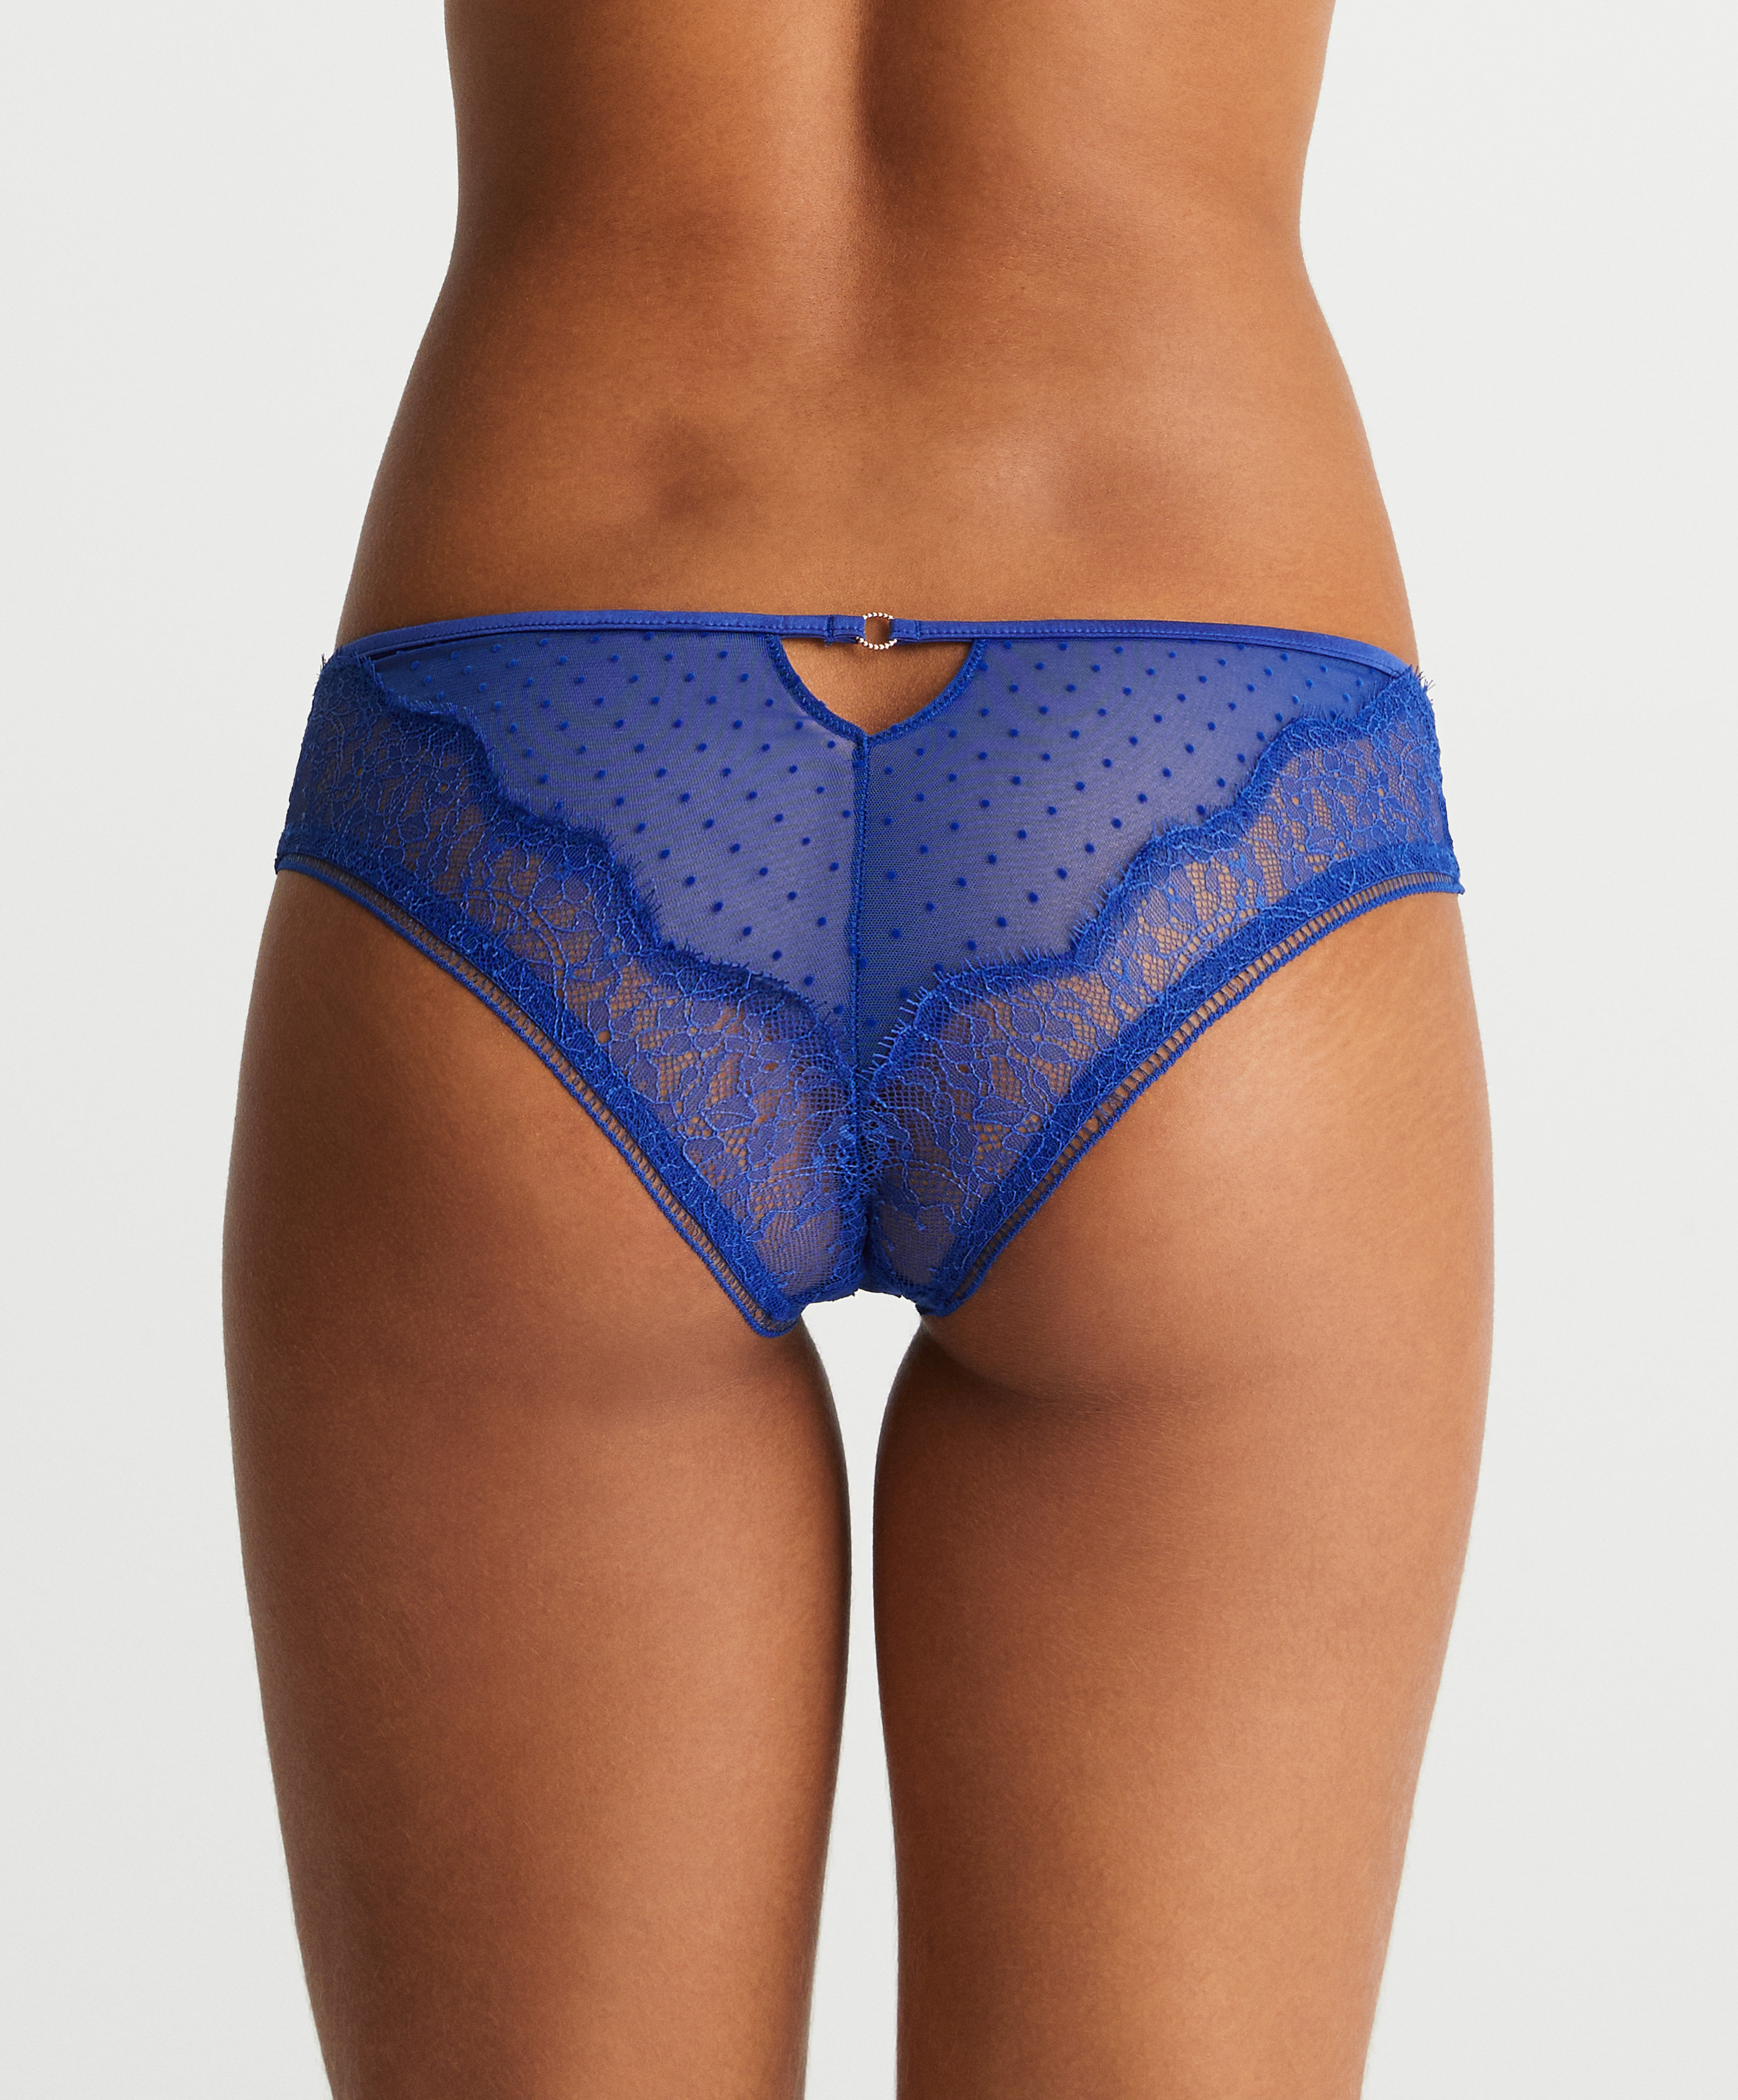 Eyelash lace combined classic briefs